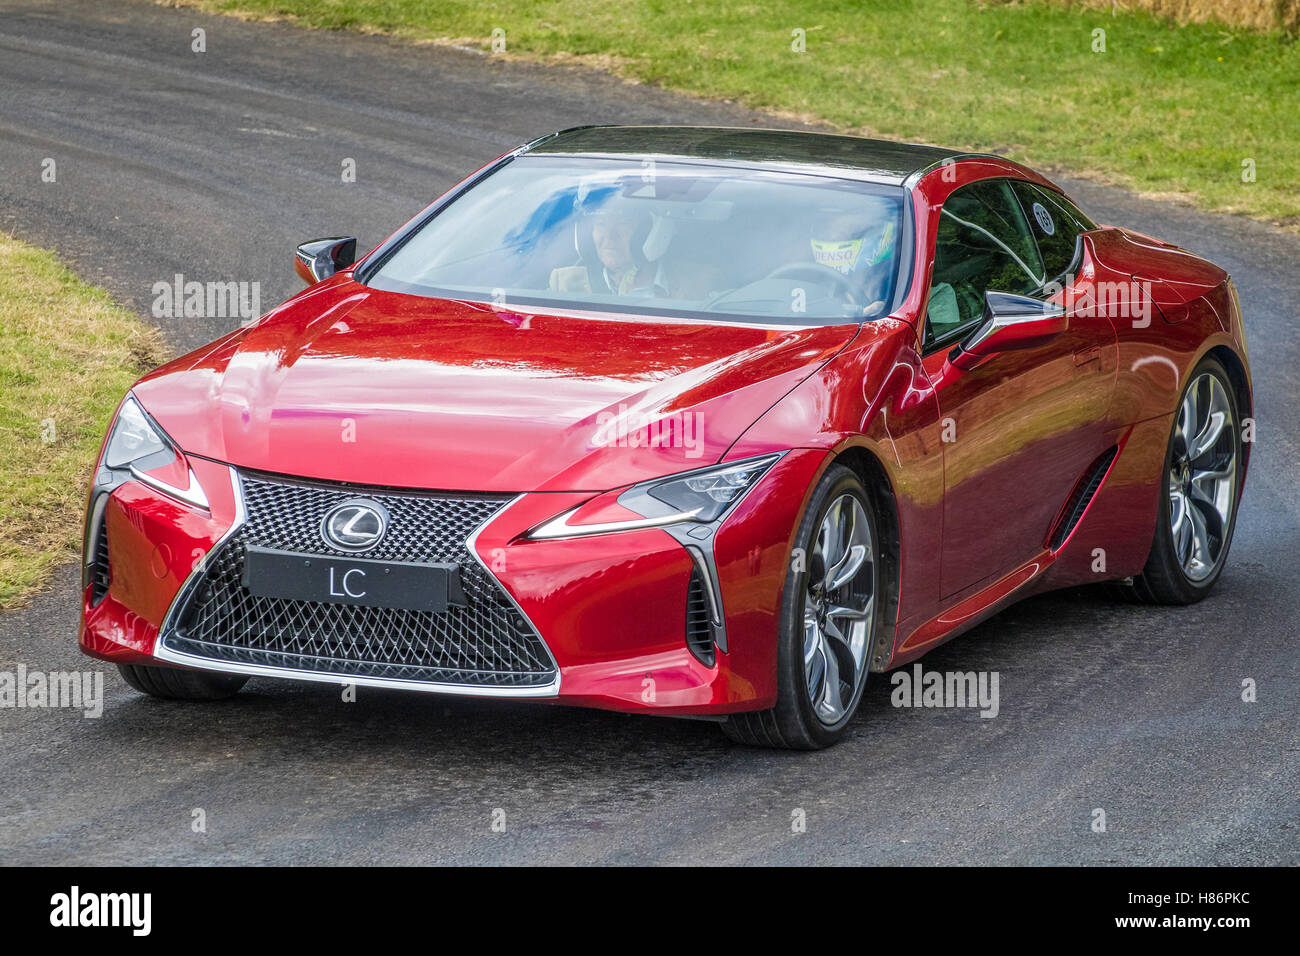 2015 Lexus LC-500 sports car at the 2016 Goodwood Festival of Speed, Sussex, UK Stock Photo